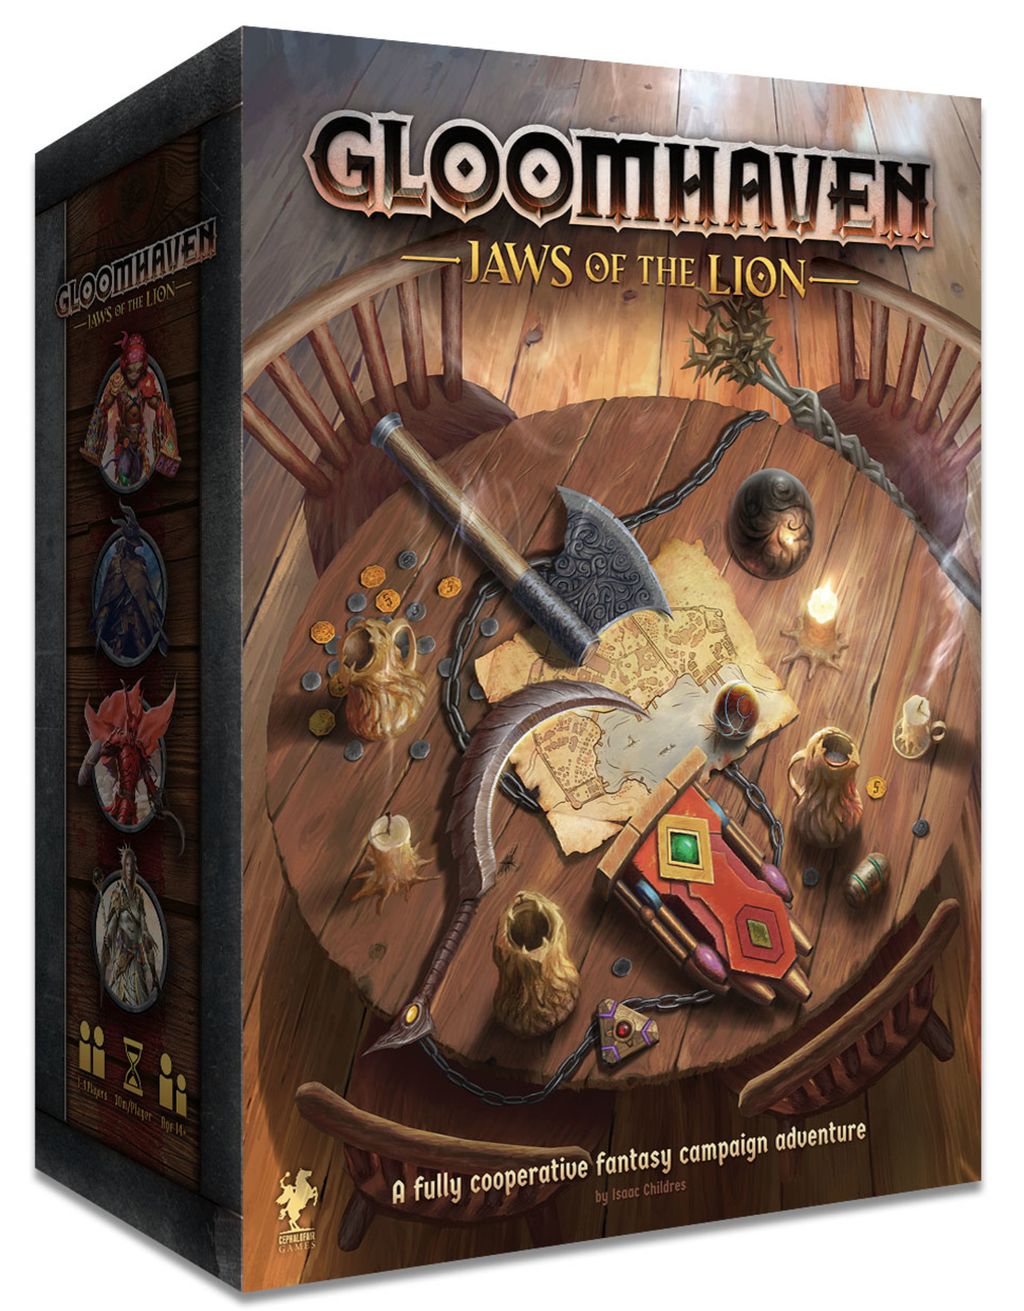 Gloomhaven Jaws of the Lion.jpg